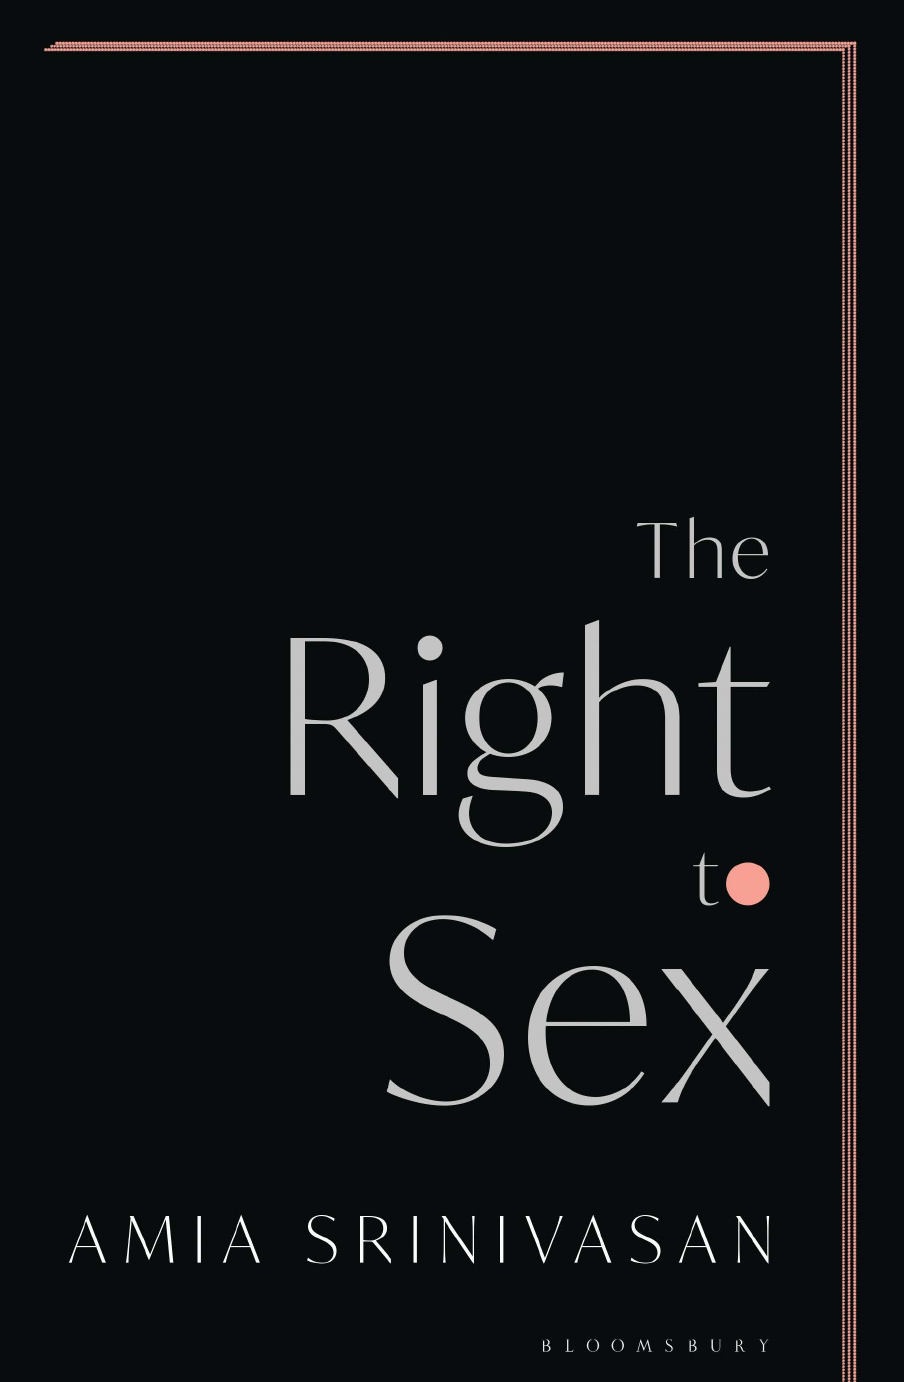 First Time Blood Xxx Gangbang Rape Hd Video Download - Week 14 Amia Srinivasan - The Right to Sex Feminism in the Twenty-First  Century-Bloomsbury Publishing (2021)